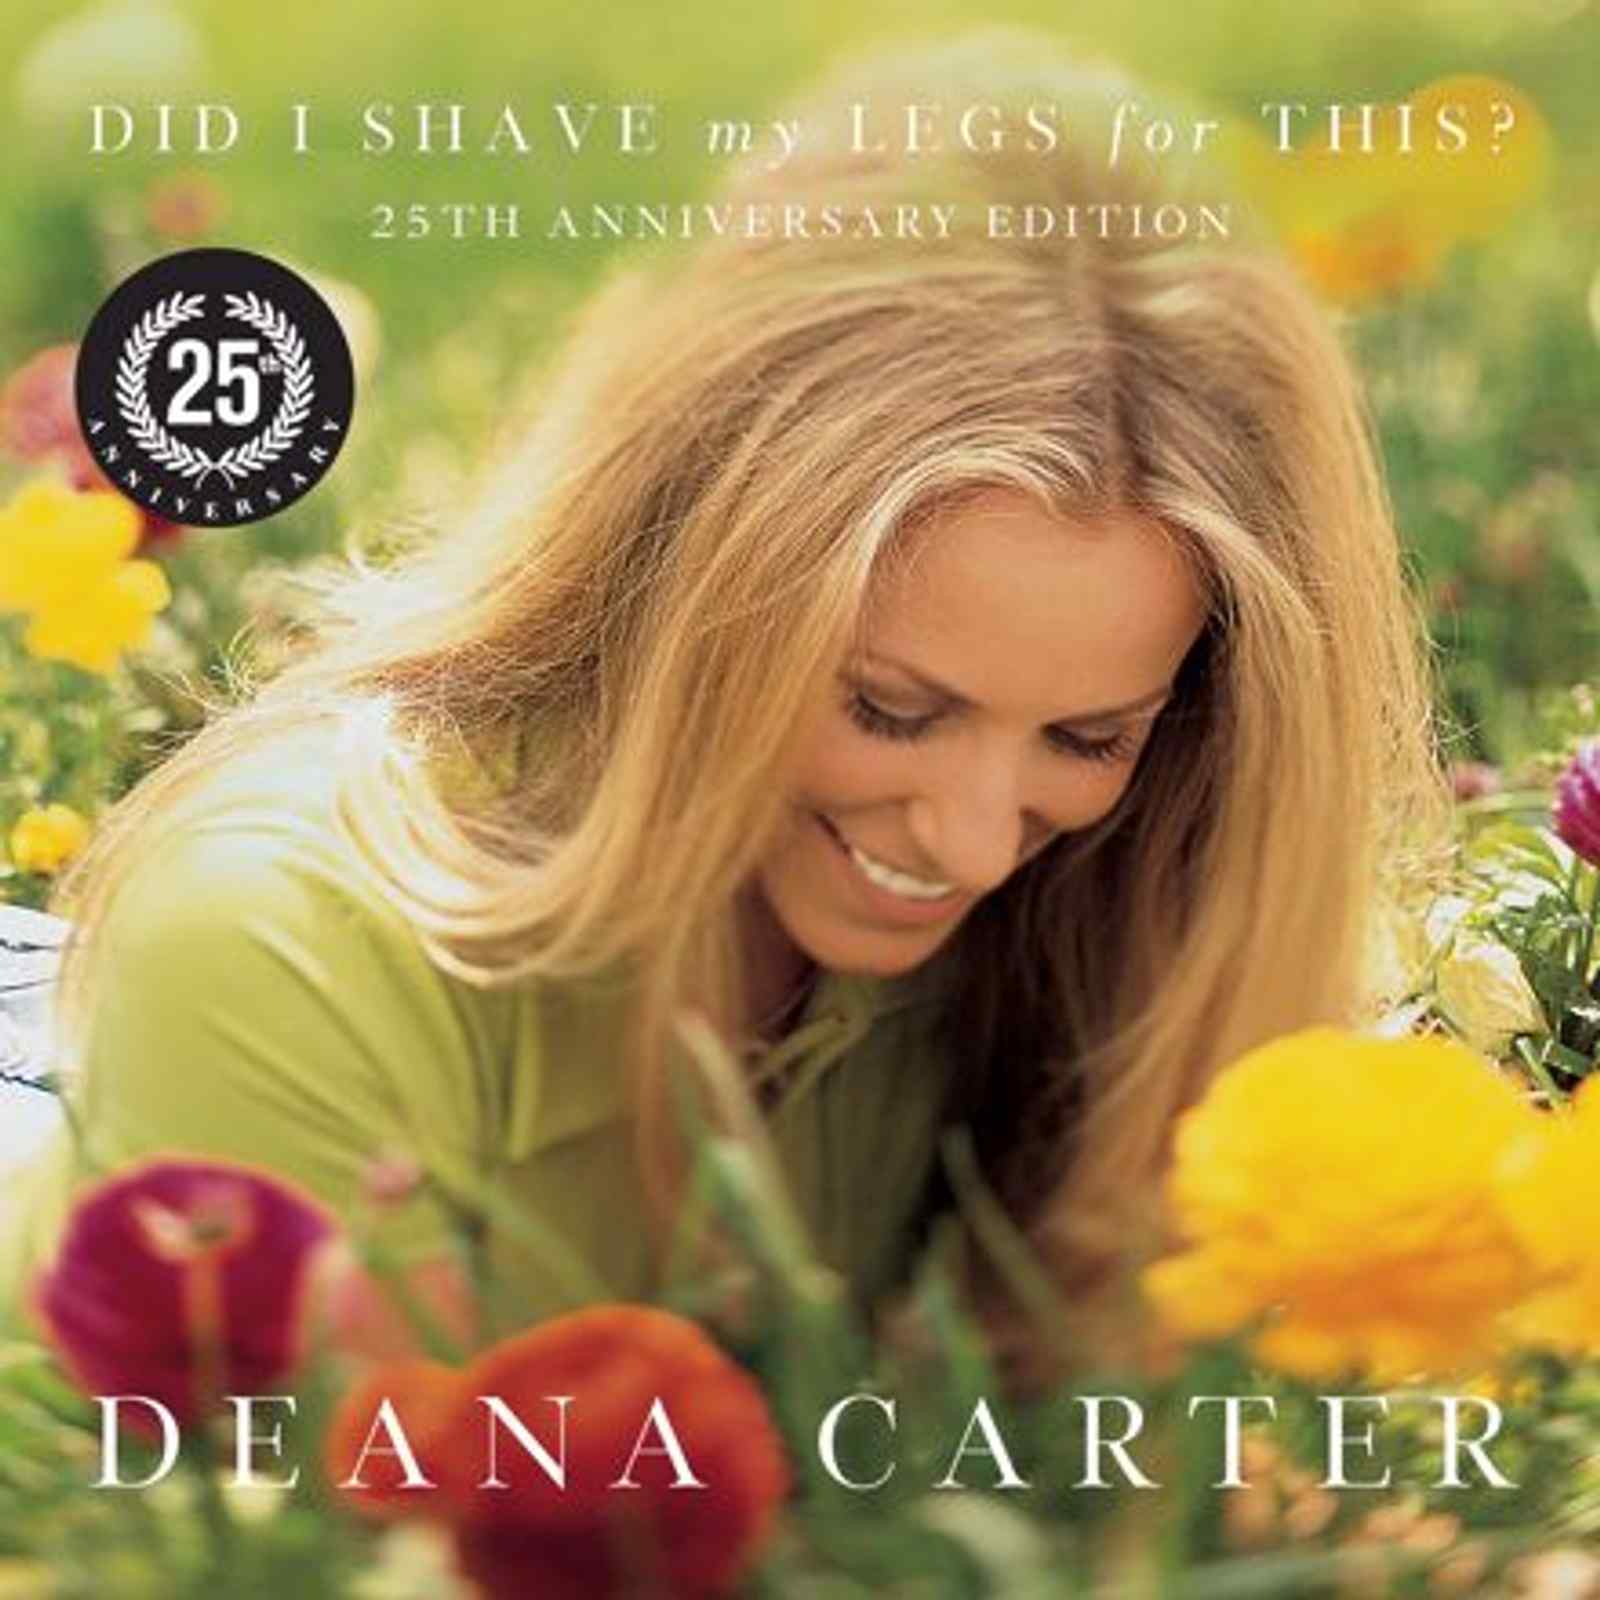 Did I Shave My Legs For This? 25th Anniversary Edition by Deanna Carter